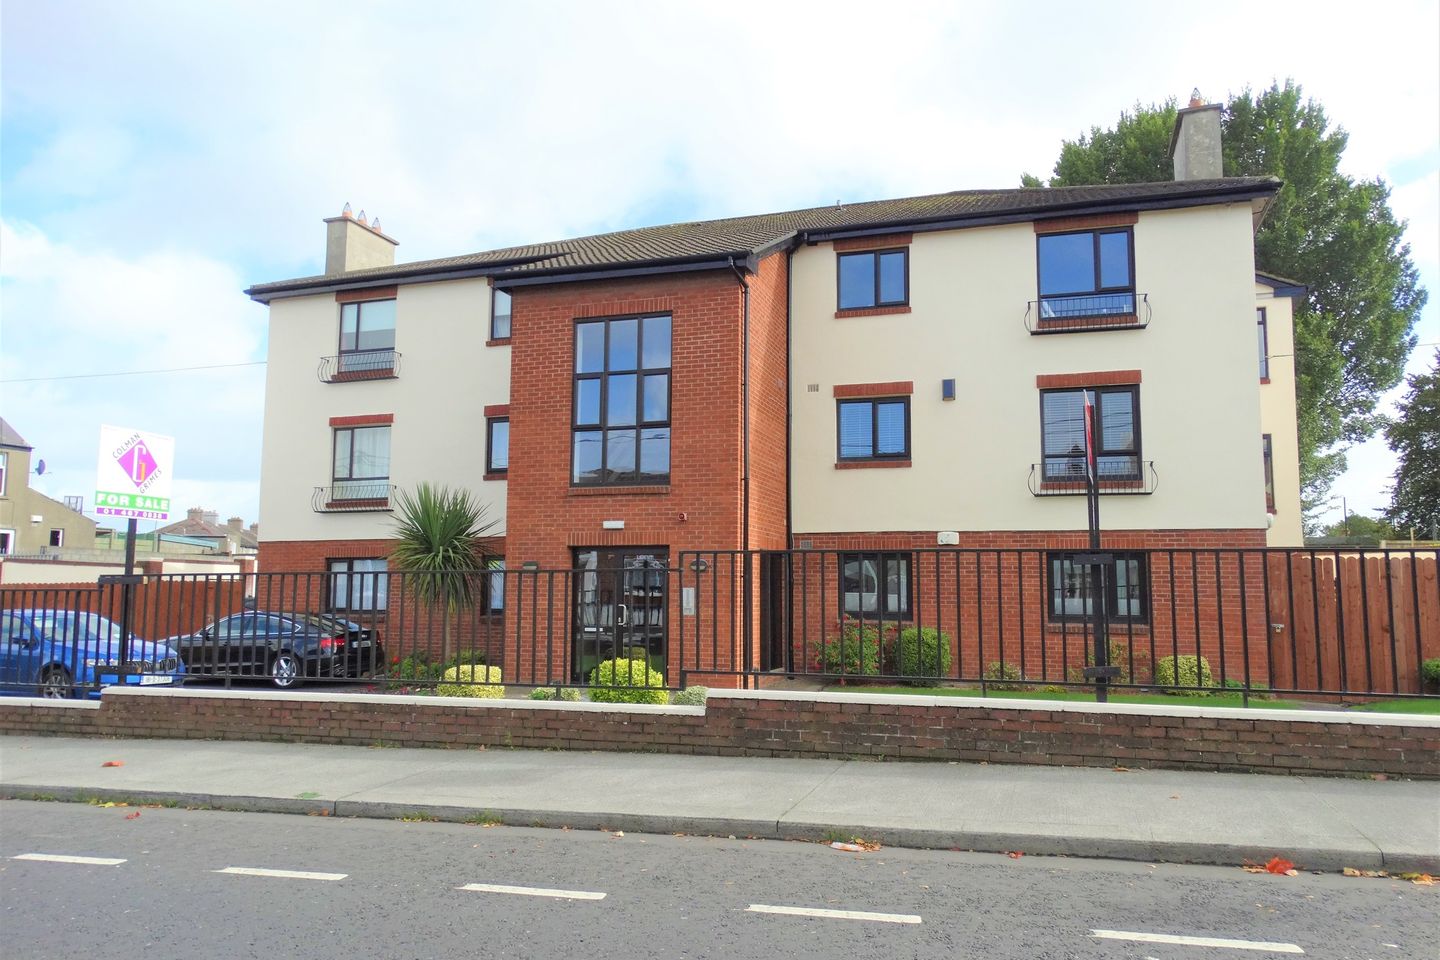 10A Bedford Court, Kimmage Road Lower, Kimmage, Dublin 6W